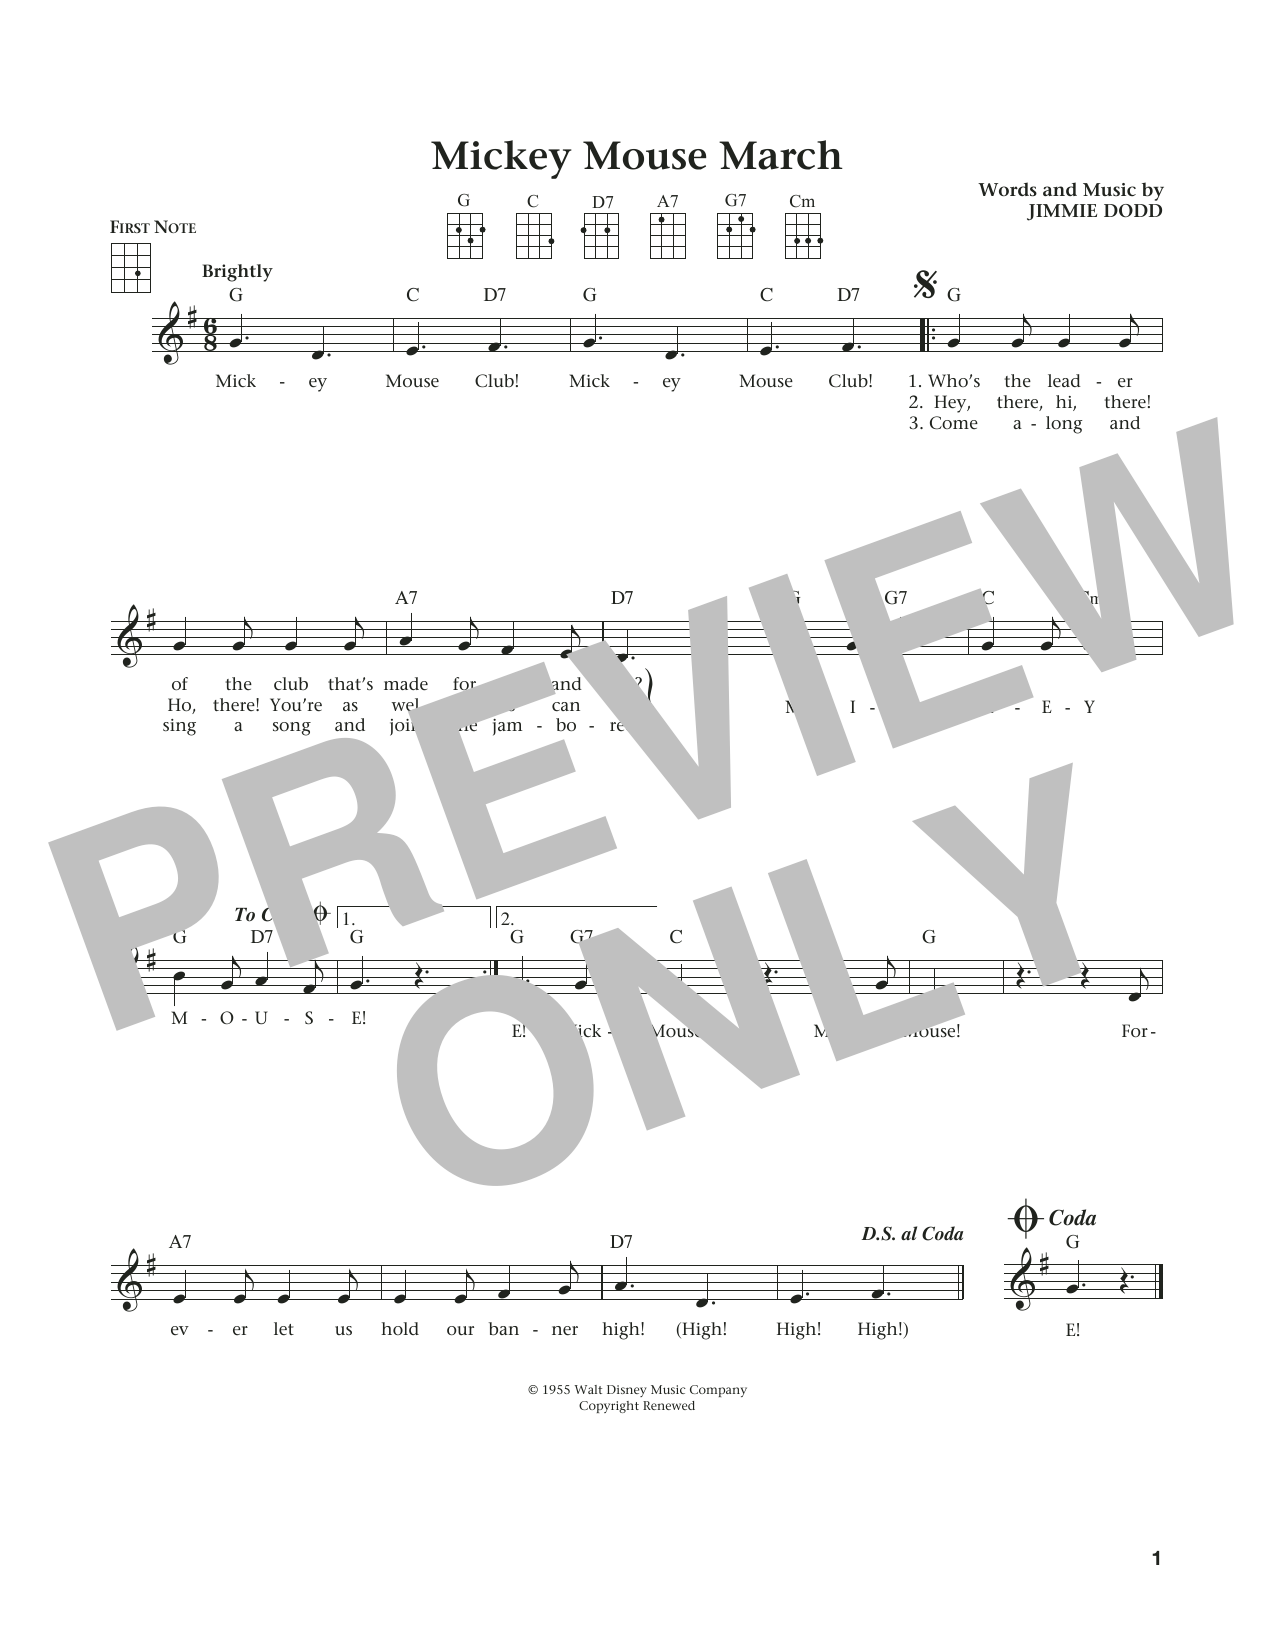 Download Jimmie Dodd Mickey Mouse March (from The Daily Ukul Sheet Music